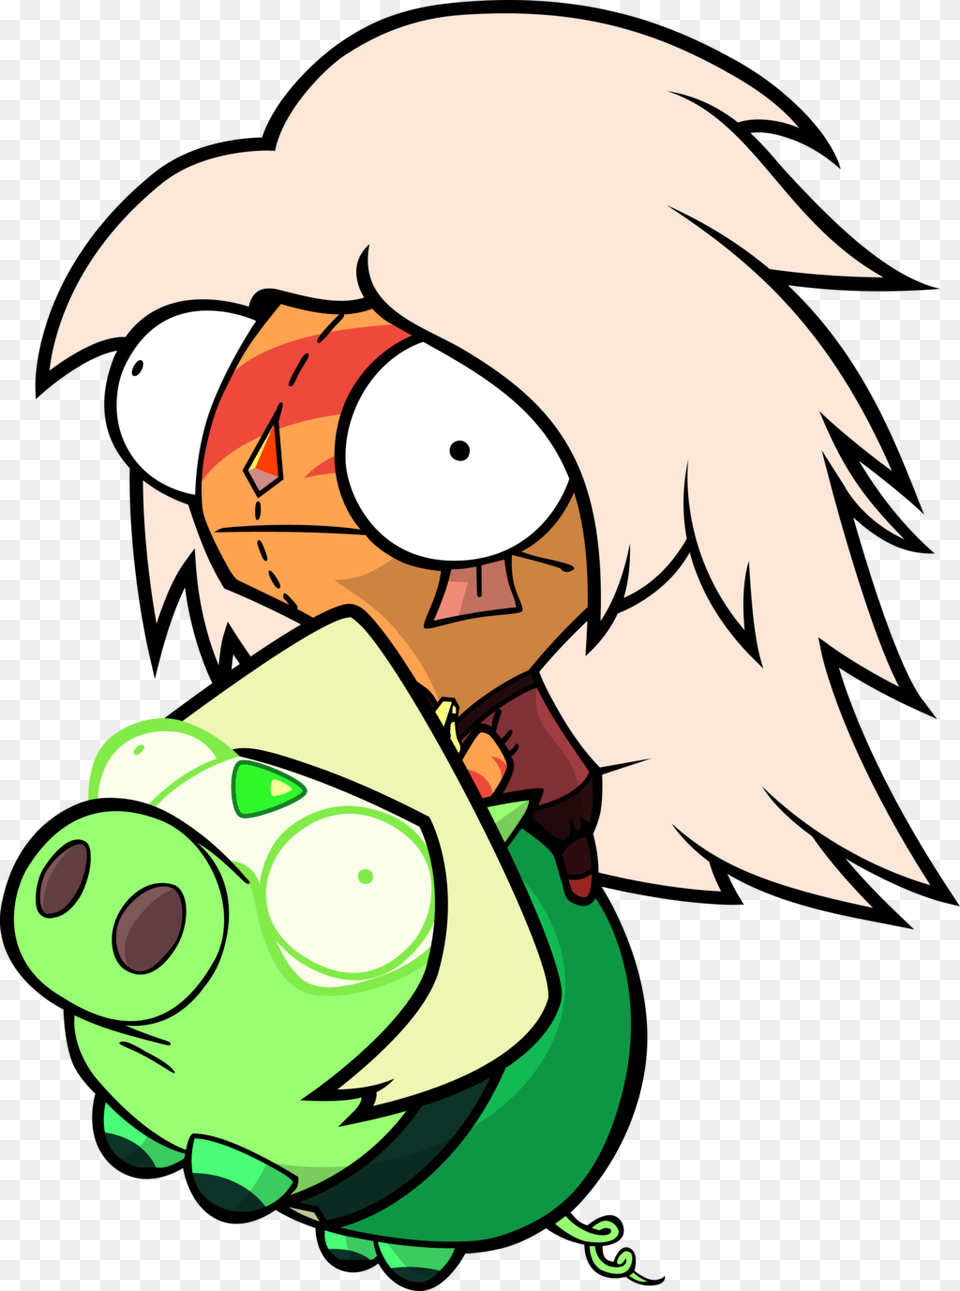 Found This While Looking For Pumpkin Templates With Steven Universe Pumpkin Dog, Book, Comics, Publication, Face Png Image